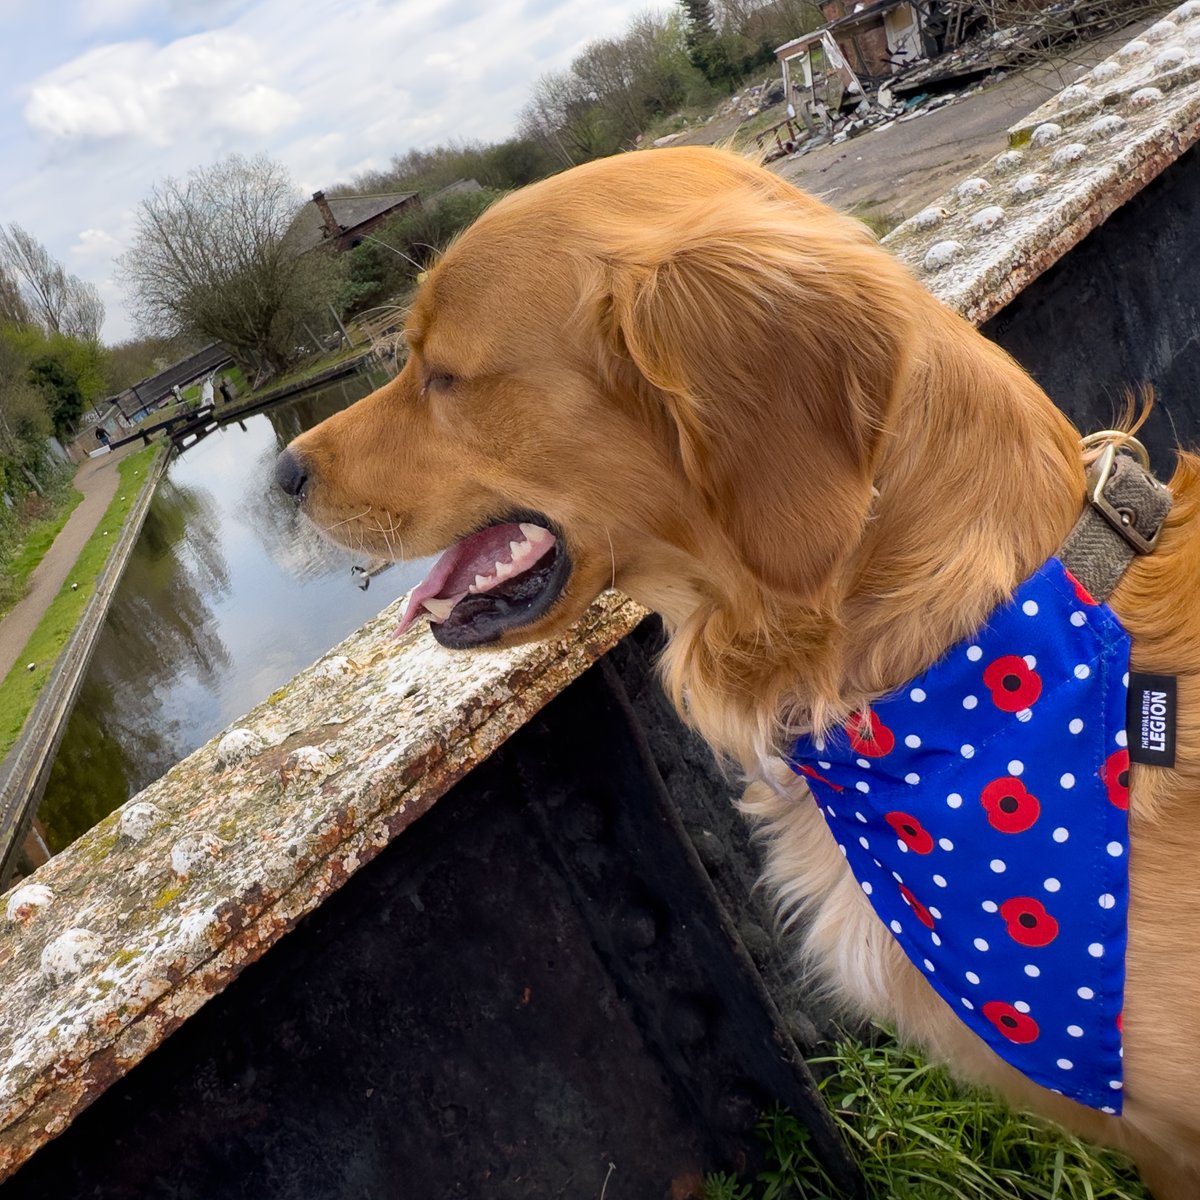 Finlay's first fundraiser page is up, he's walking 100km next month for #RoyalBritishLegion, that's 62 miles or 2 miles a day. #BoatsThatTweet #LifesBetterByWater #TowpathWalks #CharityWalks #Fundraising #RedMoonshine @CanalRiverTrust  Find his page at moonsh.in/walk